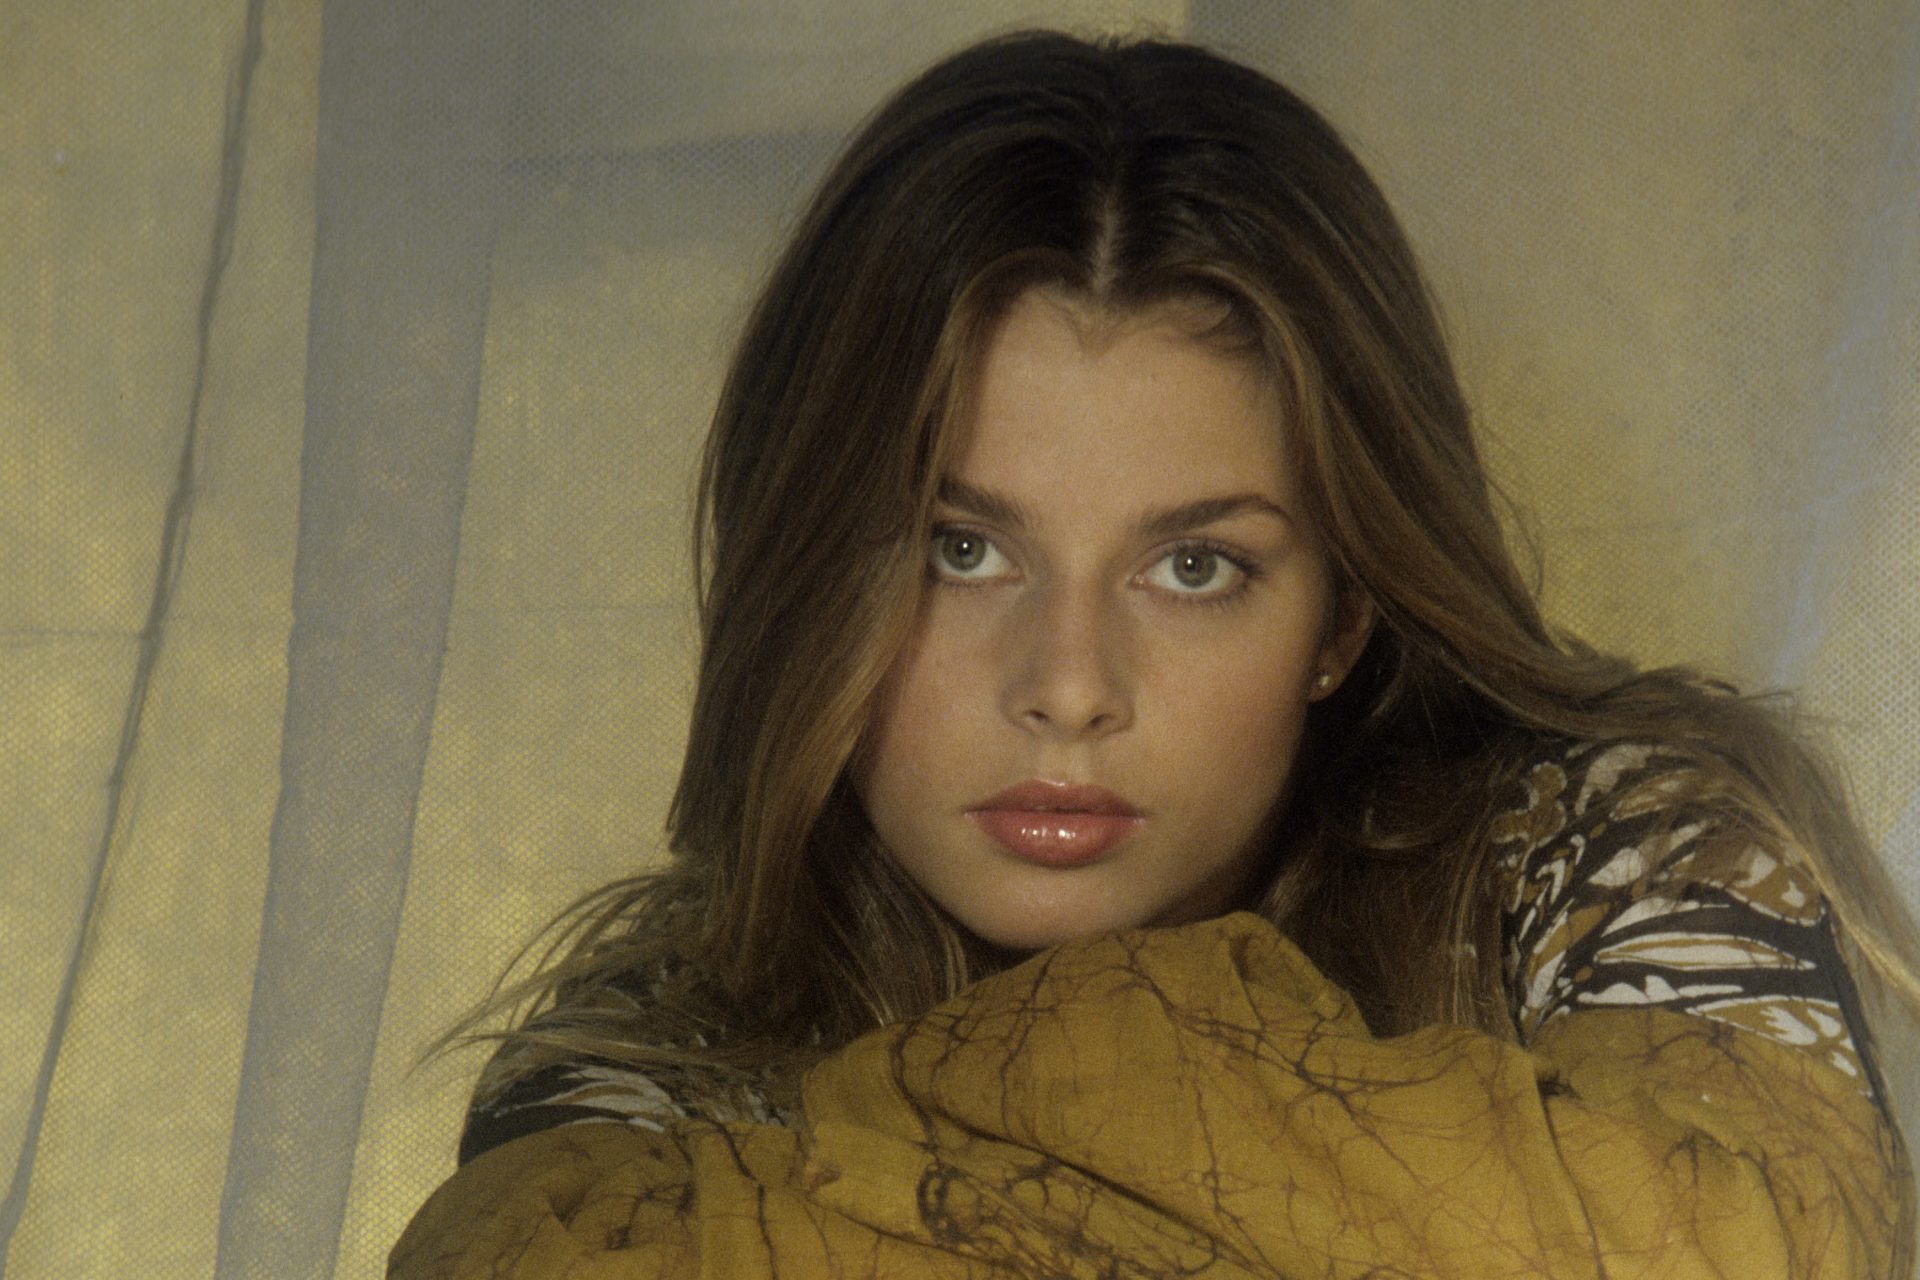 <p>Nastassja Kinski has never publicly claimed to be a victim of her father. However, in an interview with Corriere della Sera, just before her appearance at the Venice Film Festival in 2015, she said, "I am proud of my sister, for her courage in writing such a book. I know the content; I've read her words."</p>